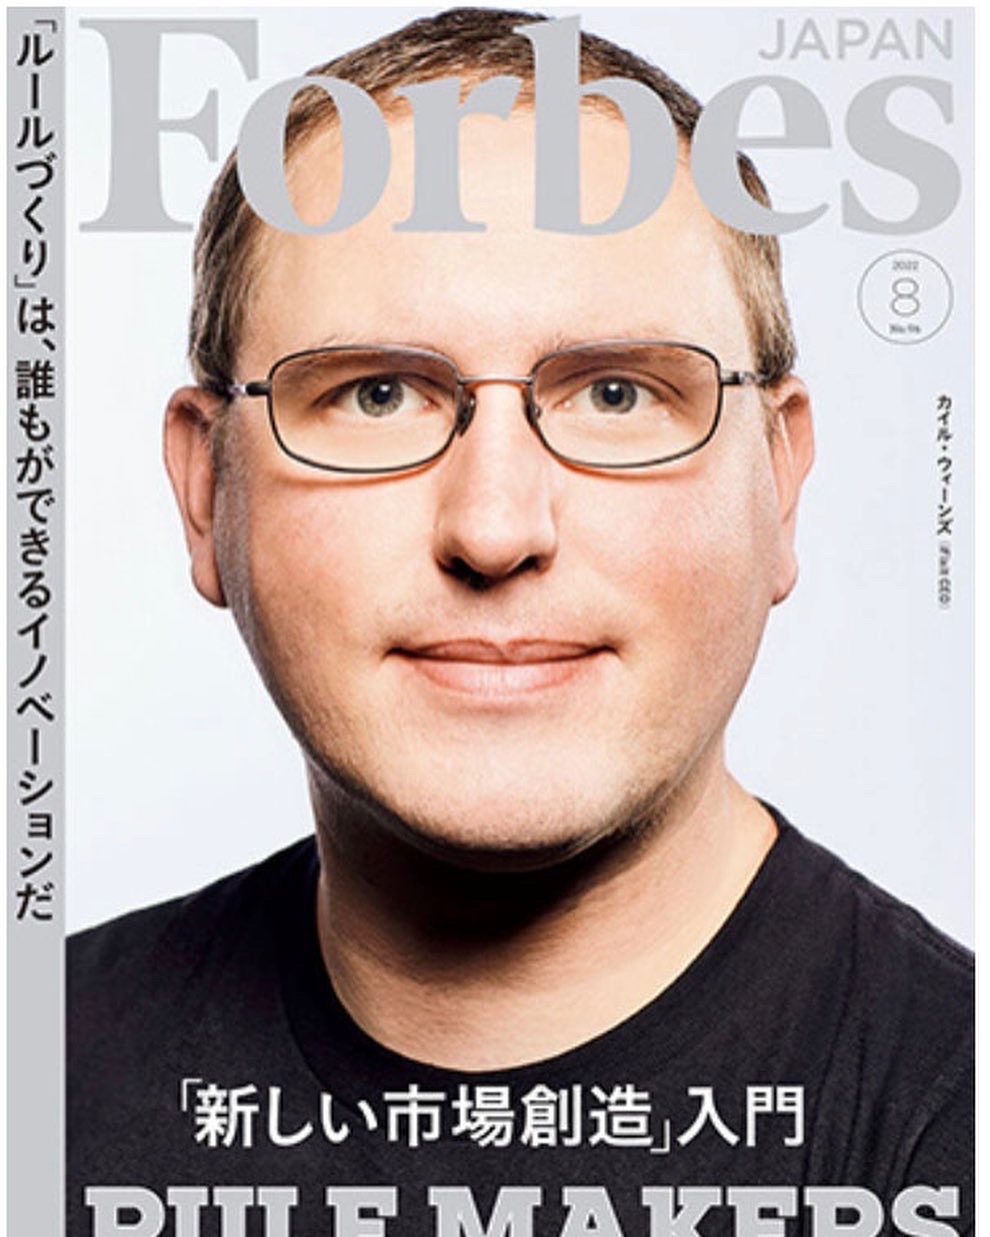 Forbes Japan Cover - Kyle Weins, iFixit.com